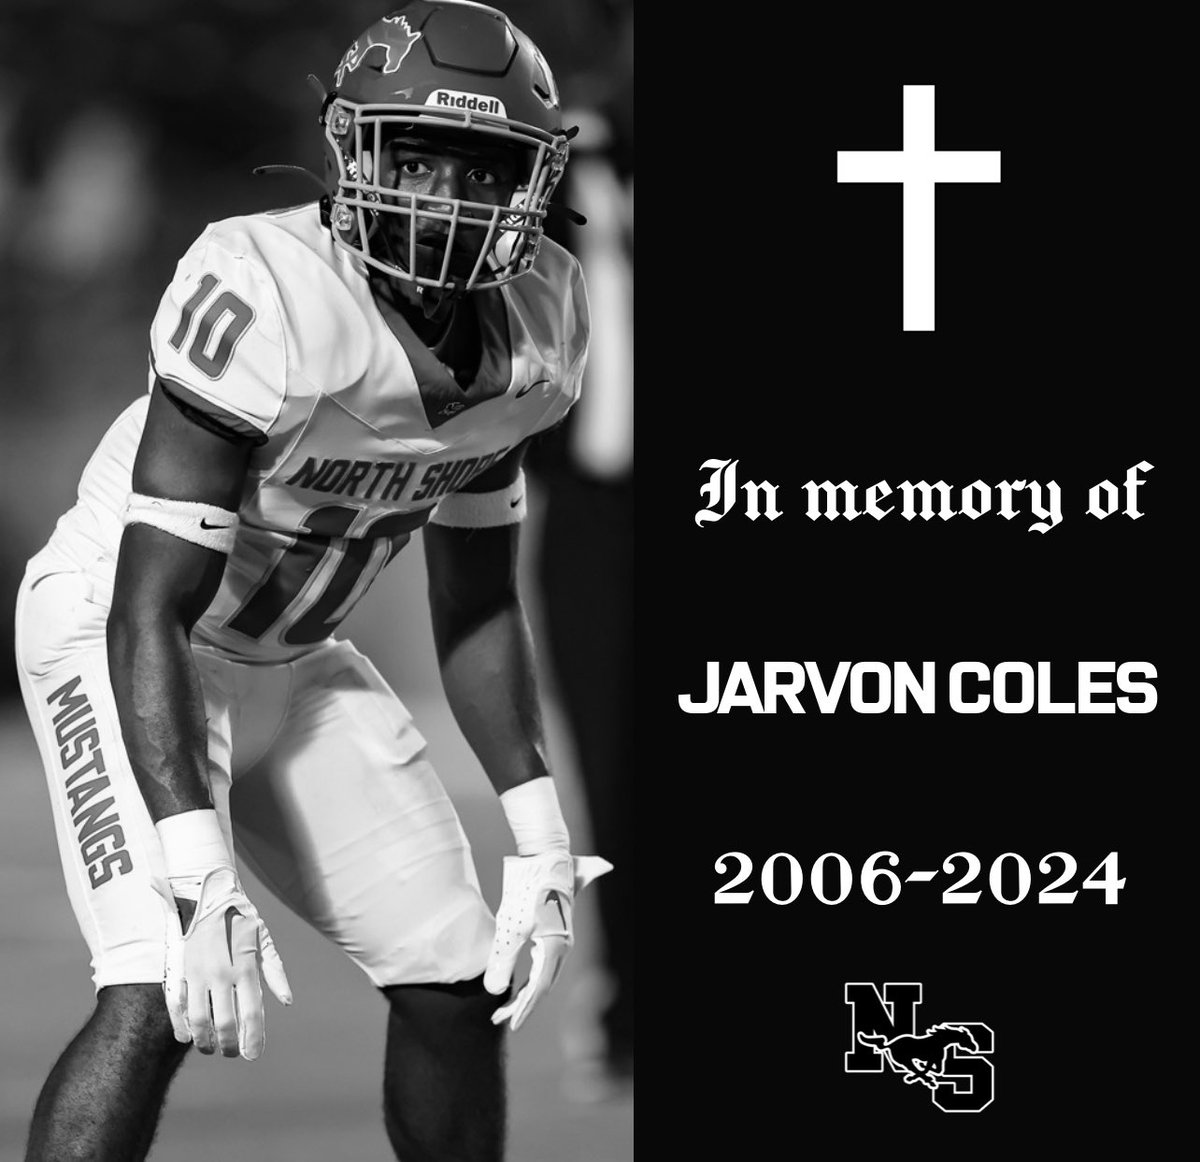 We send our deepest condolences this afternoon to the family of Jarvon Coles and the North Shore community